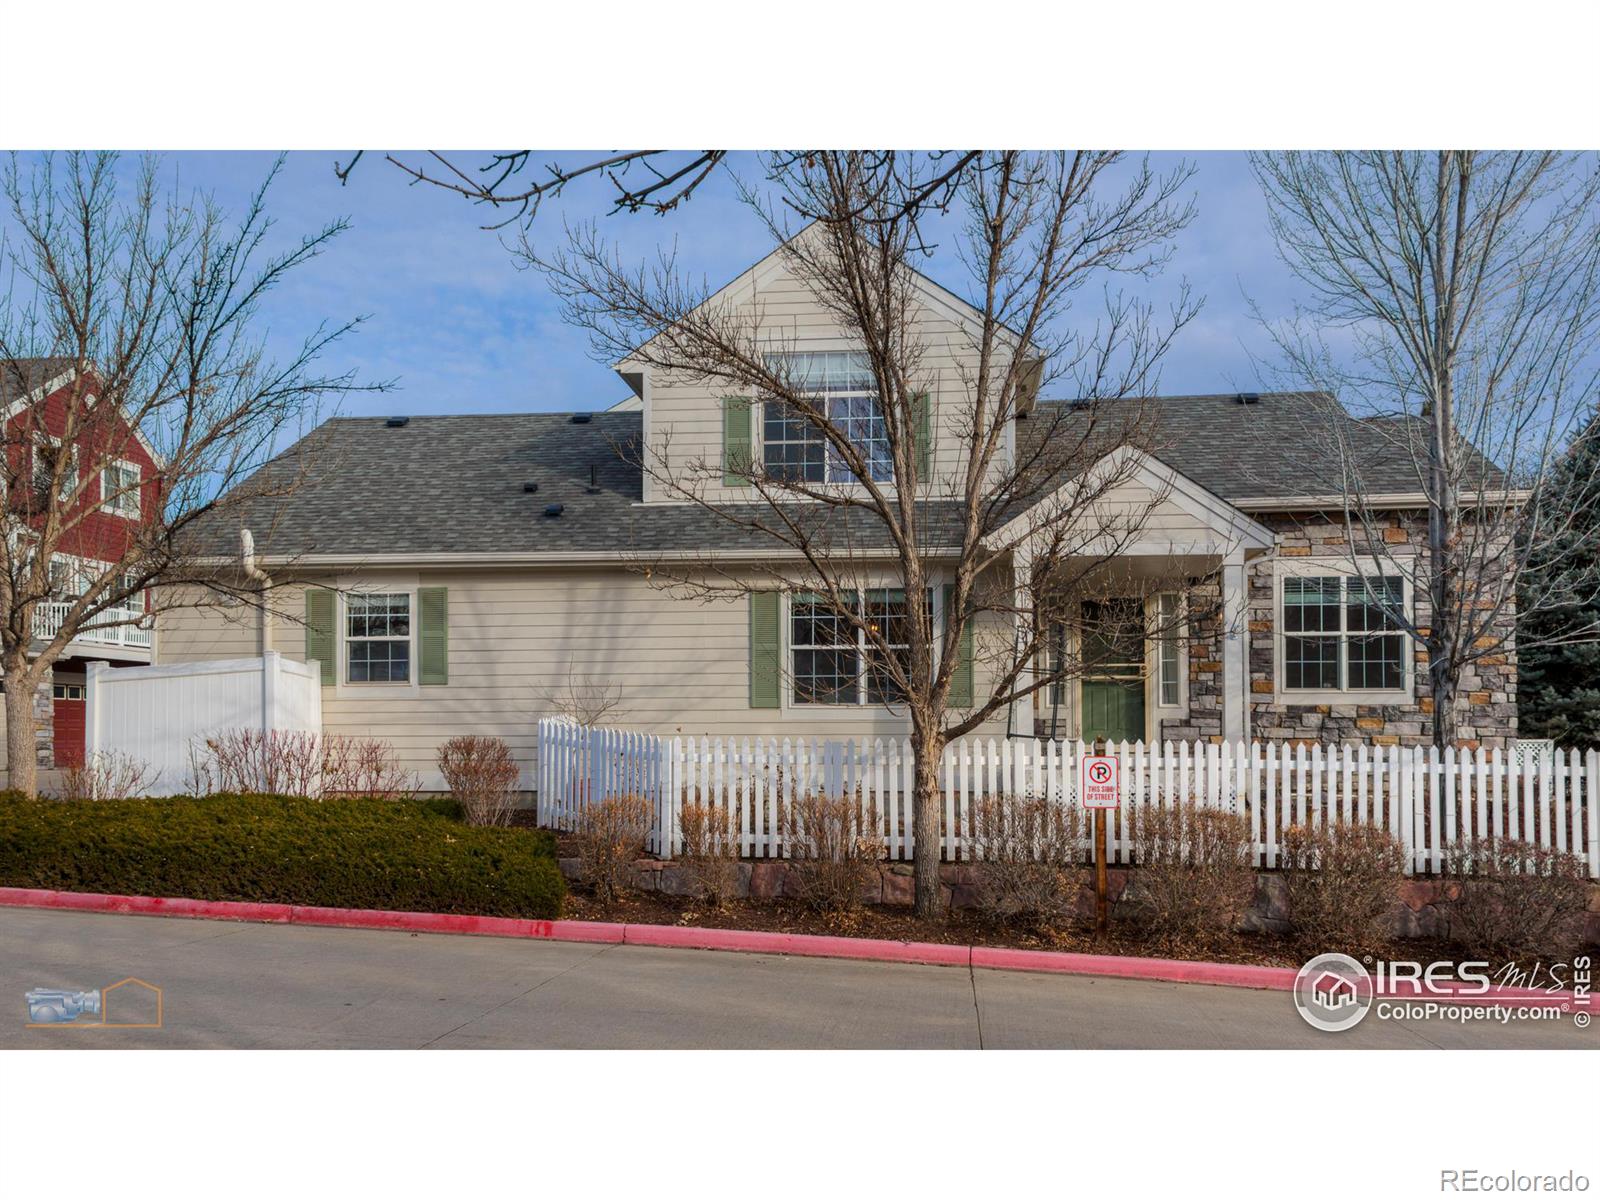 4934  prebles place, Broomfield sold home. Closed on 2024-02-14 for $597,000.